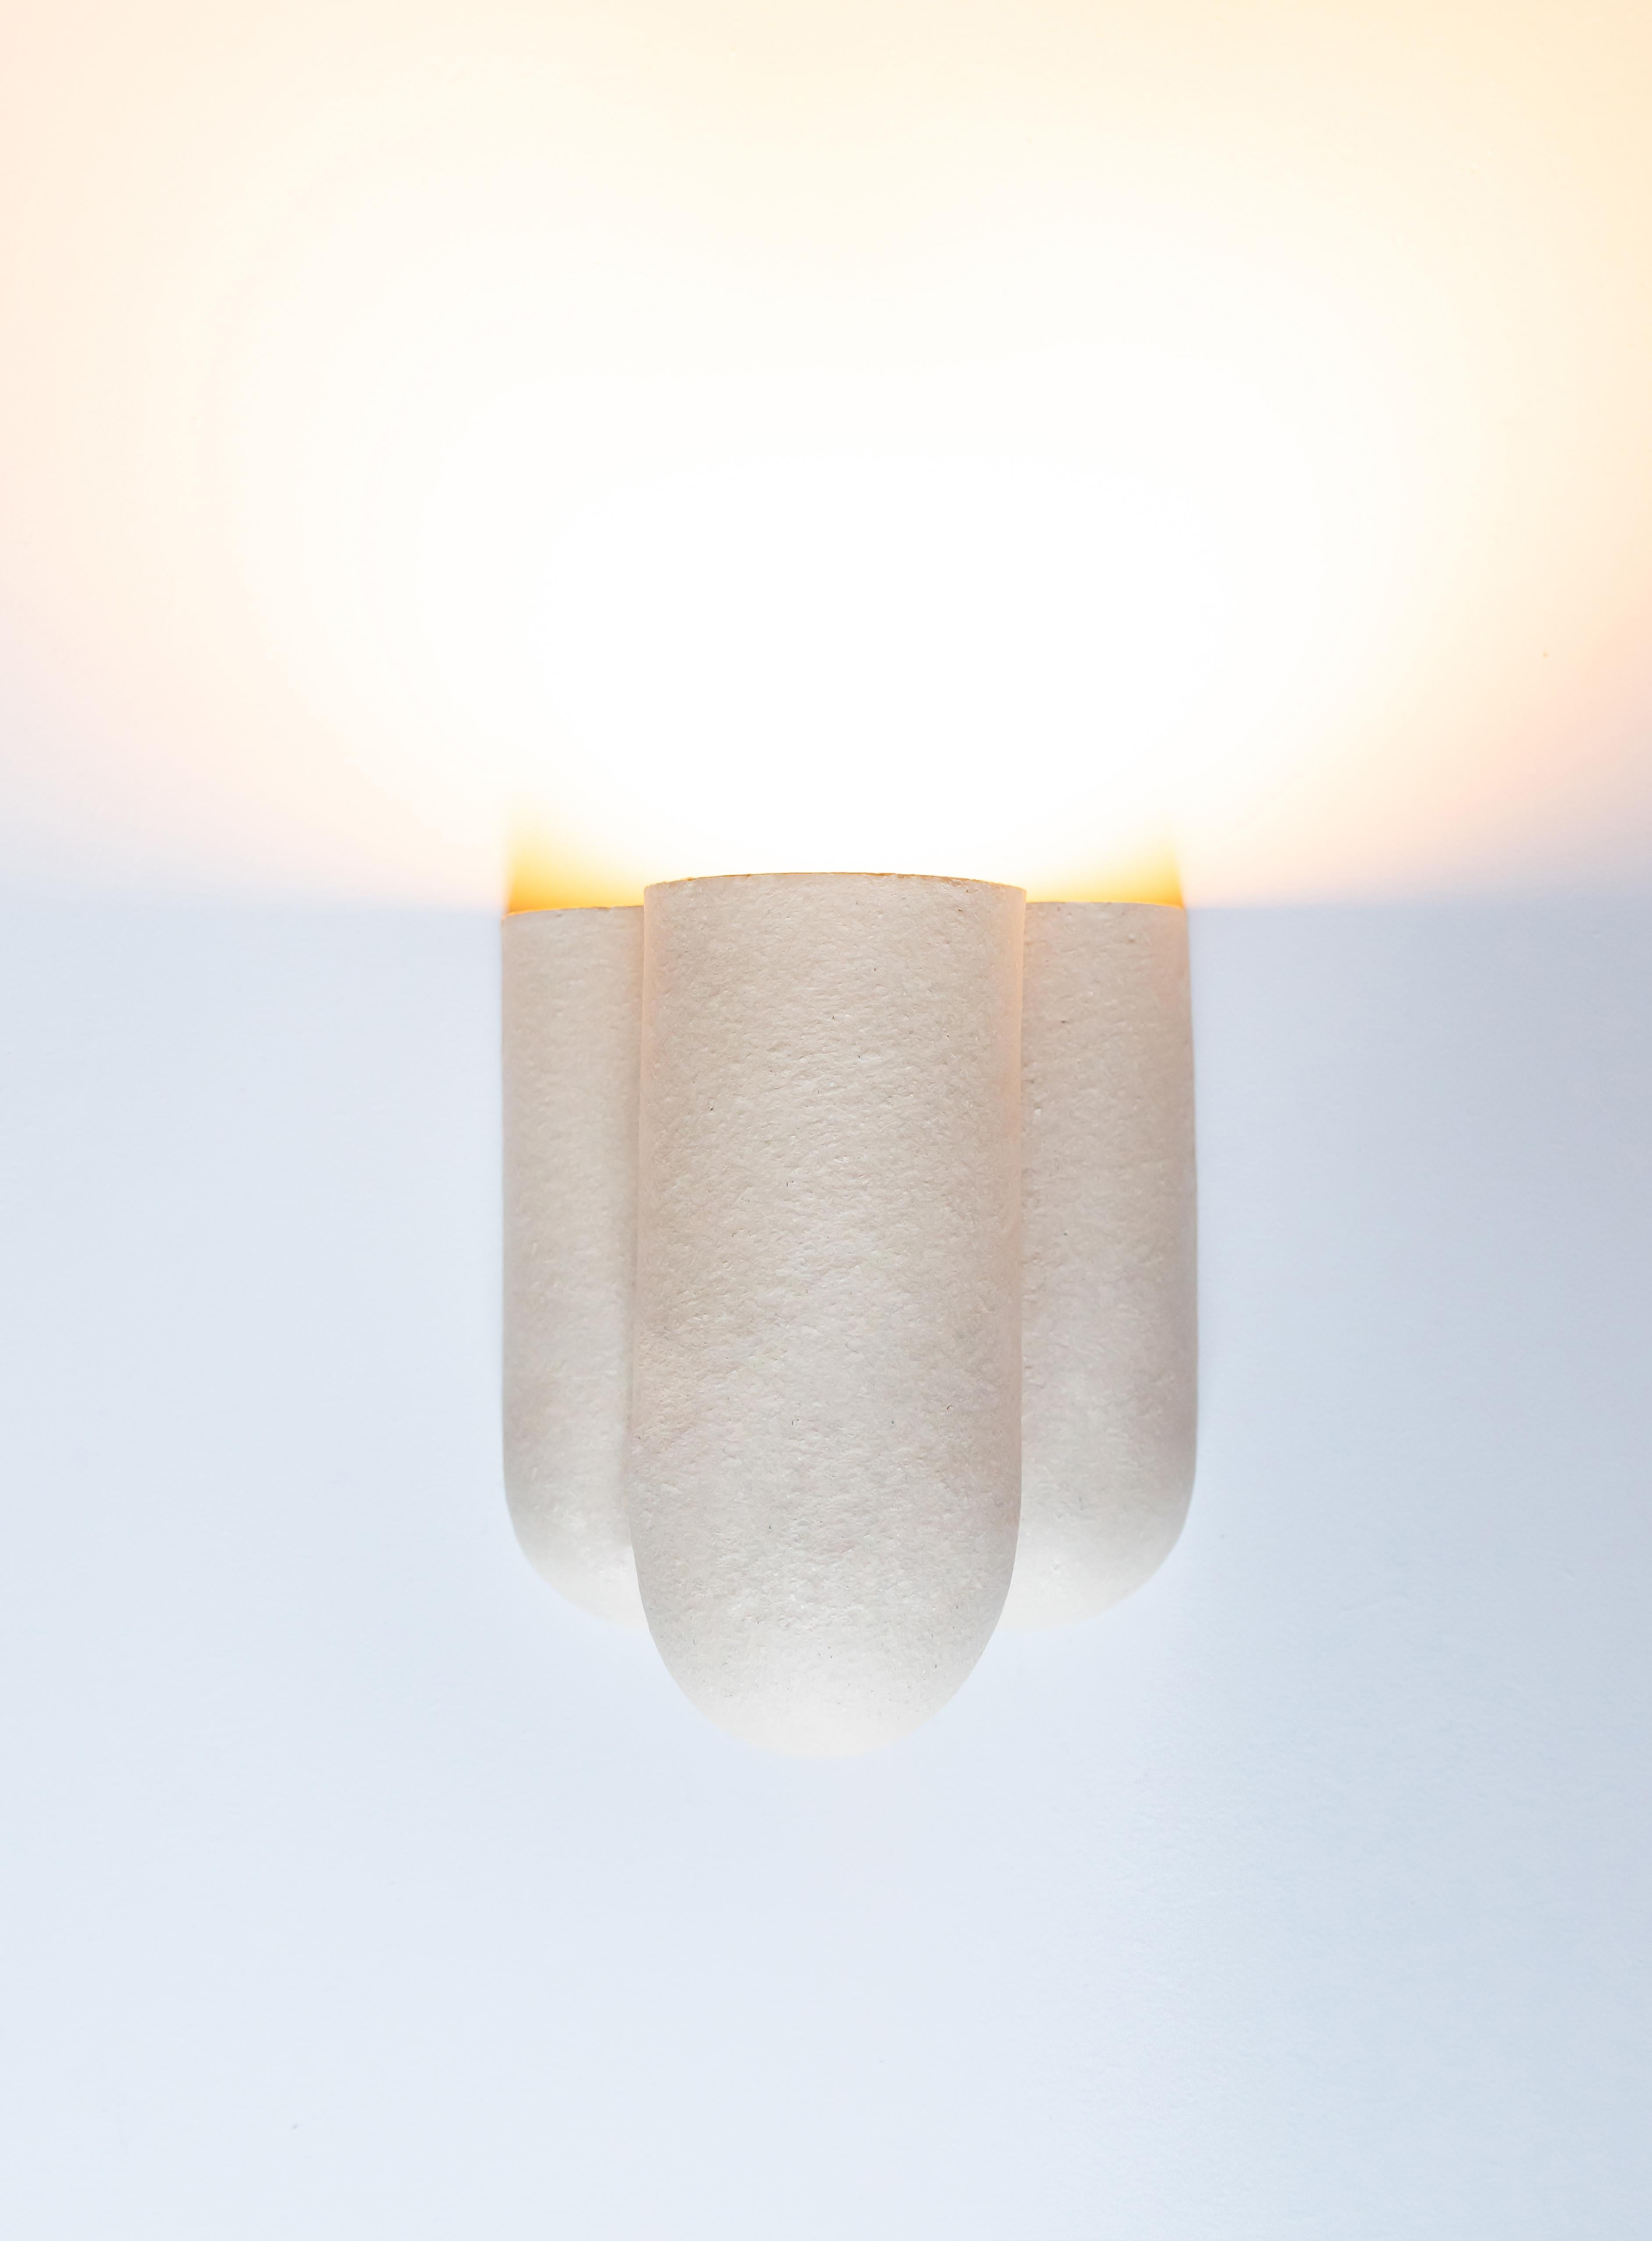 Wall light by Lisa Allegra
Dimensions: W 24 x D 17 x H 22,5 cm
Materials: Clay
Variations available, dusty pink and blackened gold.

Born in 1986 in Paris, Lisa Allegra has earned in 2010 a degree in furniture design from the École Supérieure des